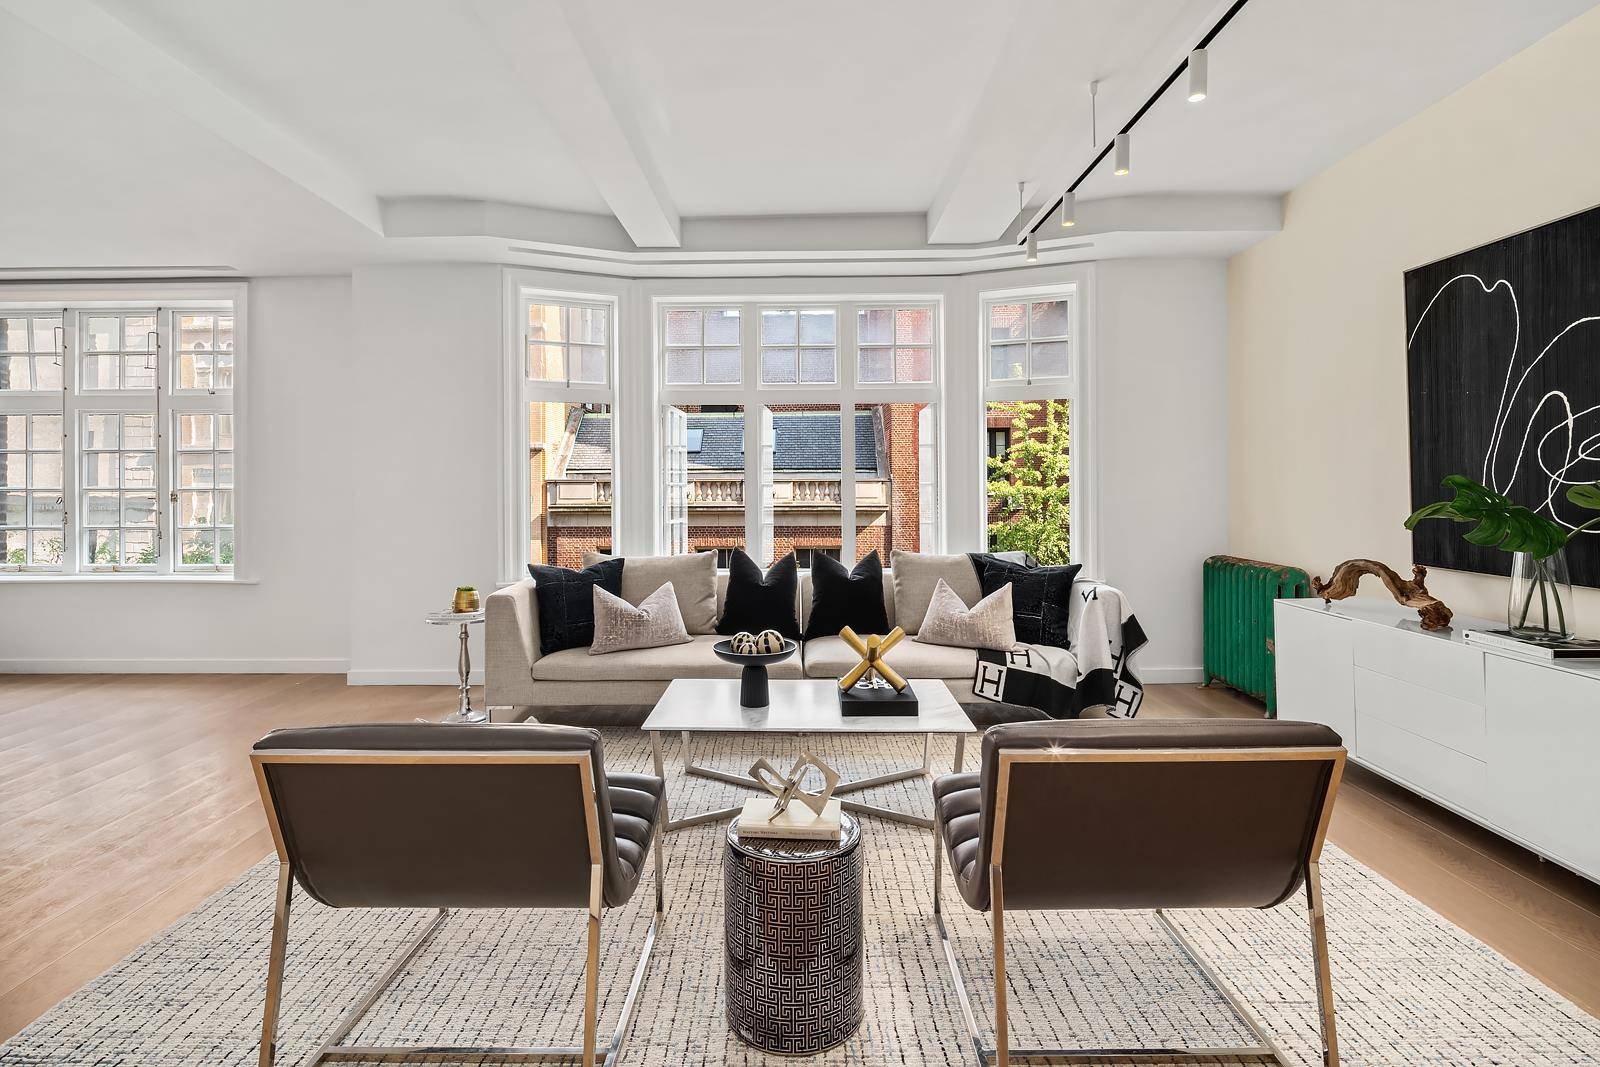 BRAND NEW, FULLY GUT RENOVATED CONDO APT OFF MADISON AVE Modern convenience meets old world charm in this newly renovated pre war condo apartment on one of the Upper East ...